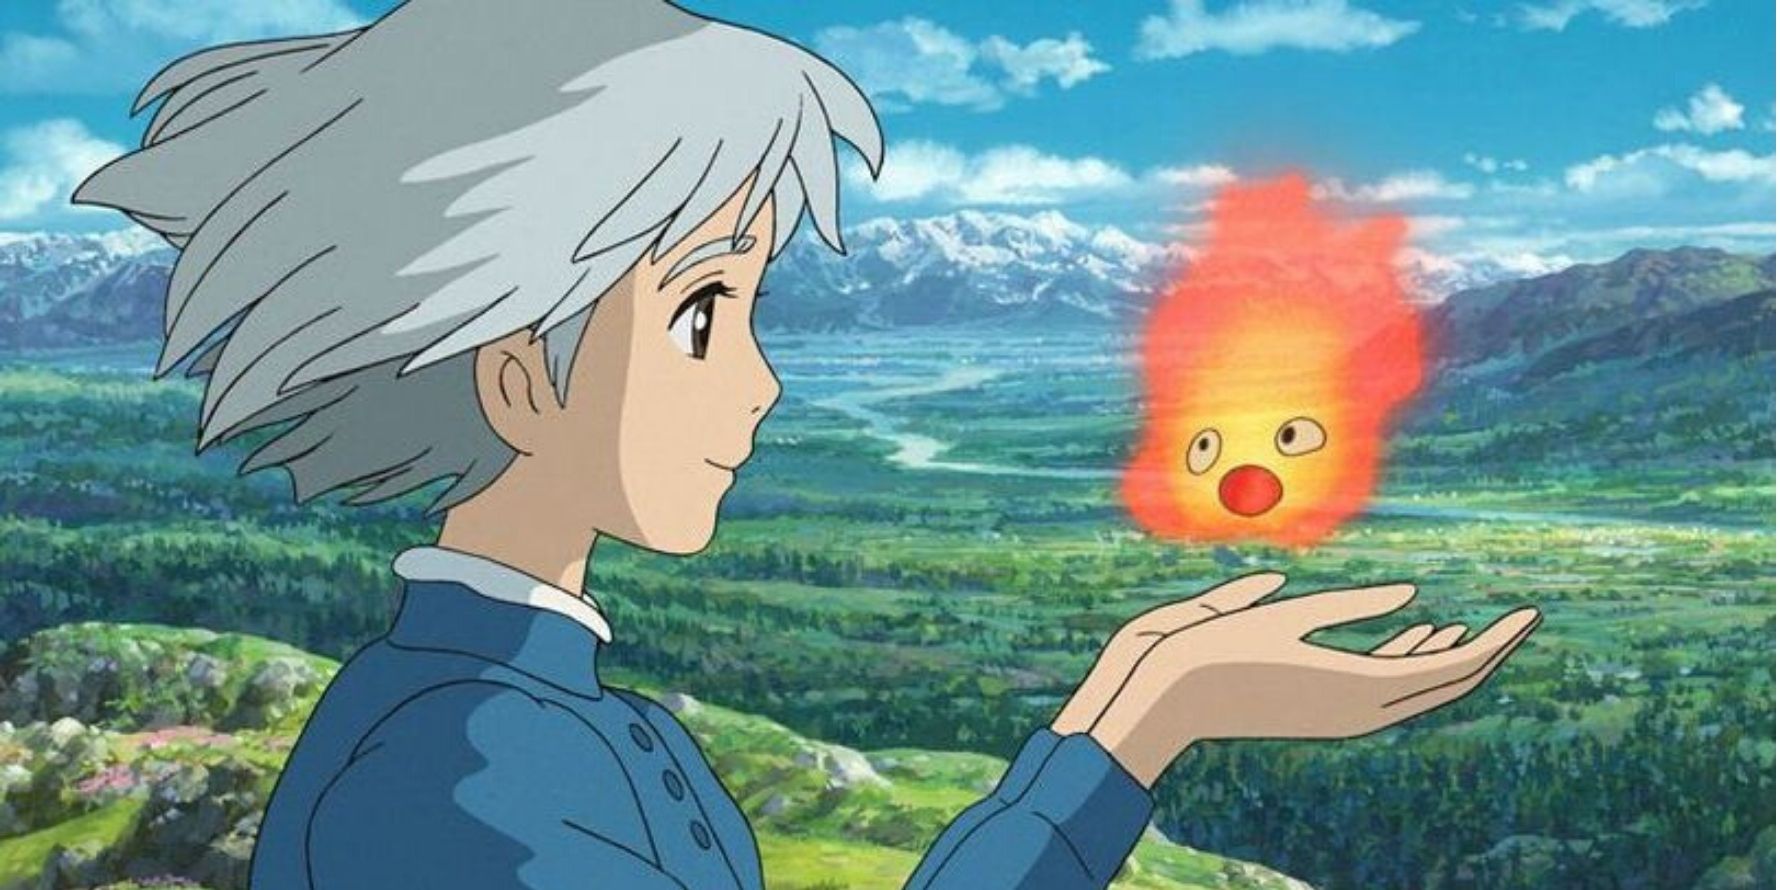 Sophie and Calcifer in Howl's Moving Castle